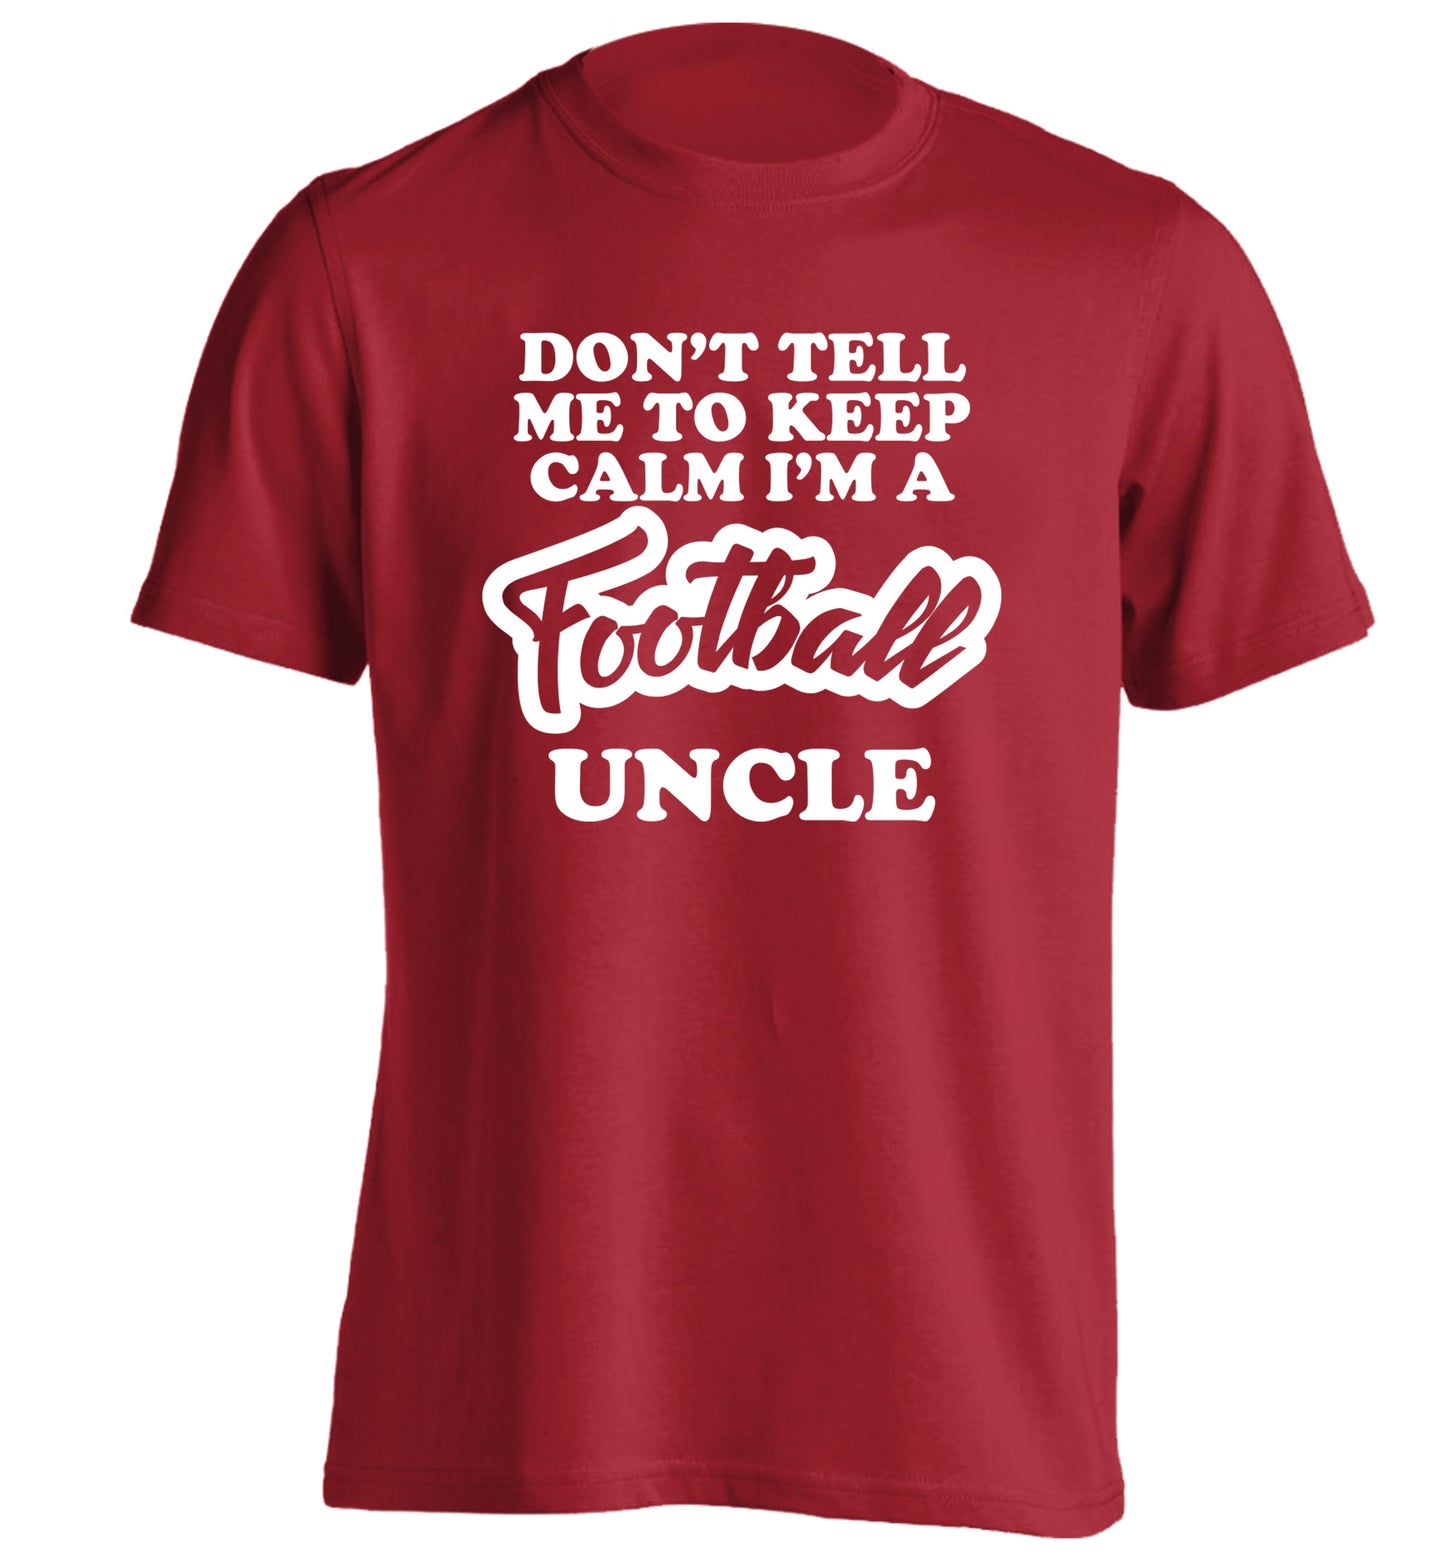 Worlds most amazing football uncle adults unisexred Tshirt 2XL